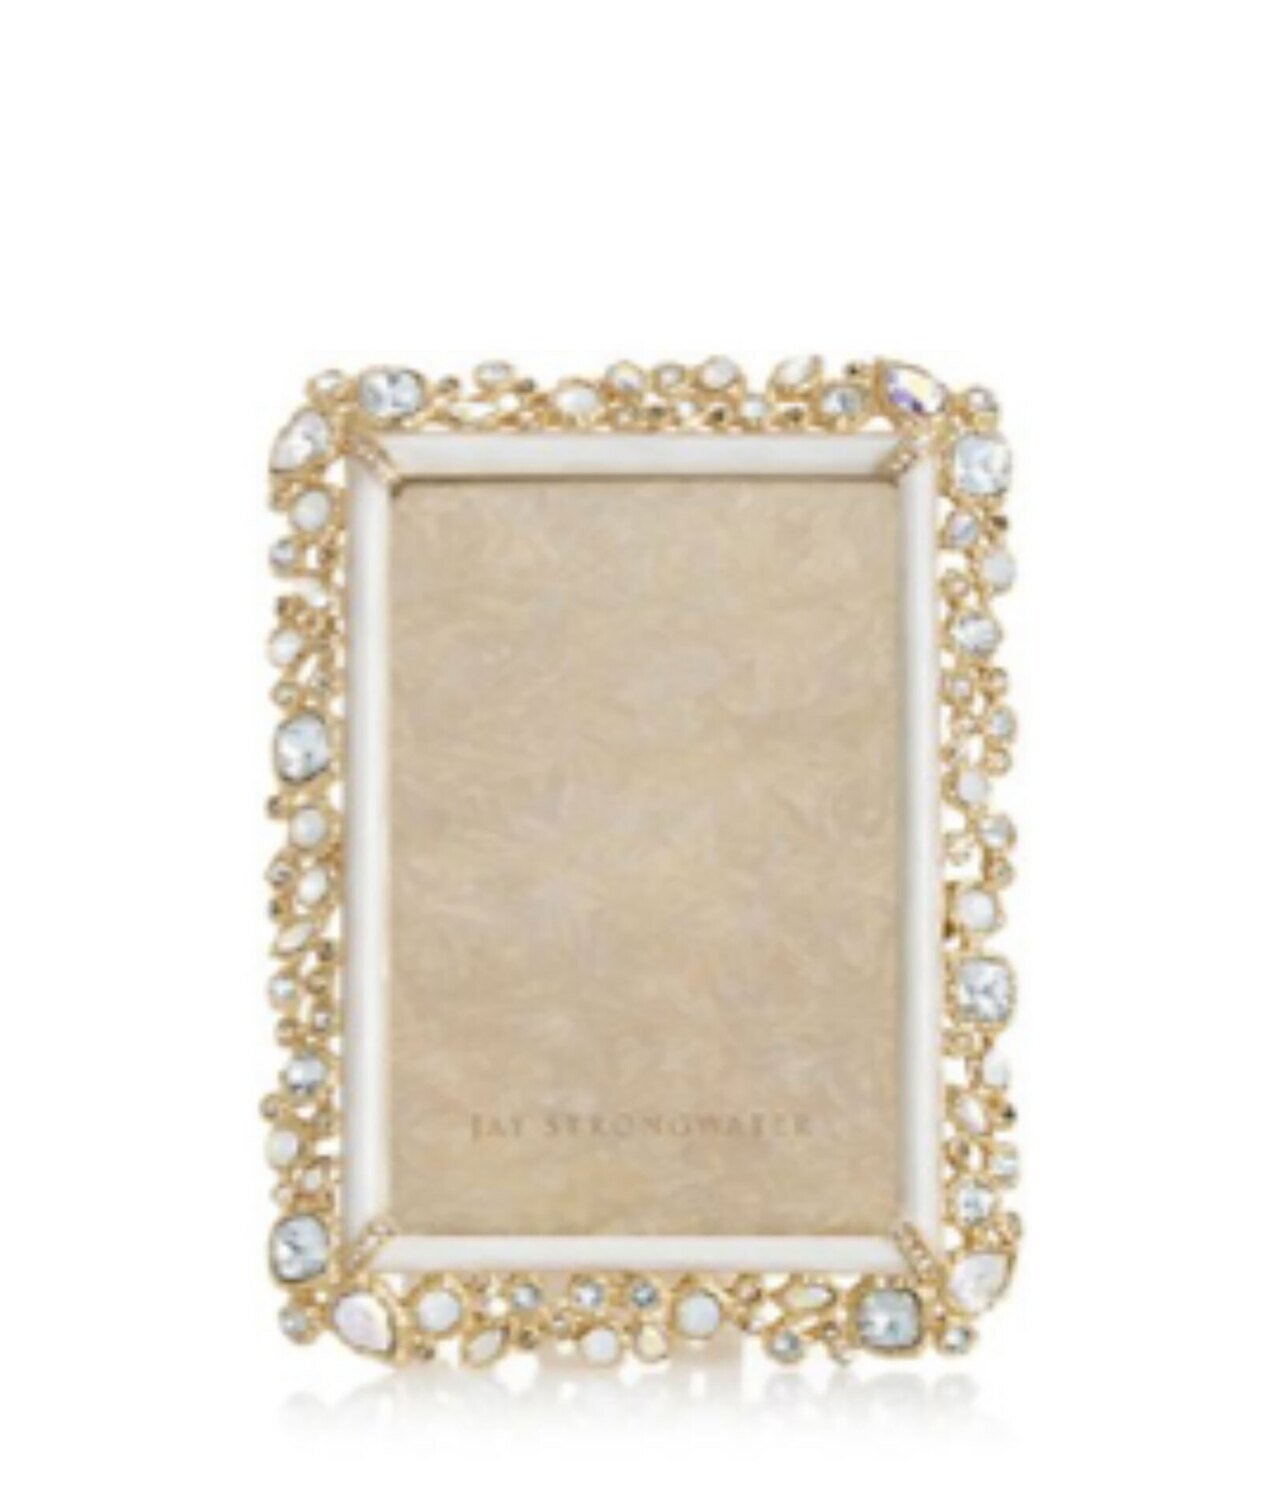 Jay Strongwater Bejeweled 4" x 6" Picture Frame SPF5813-219